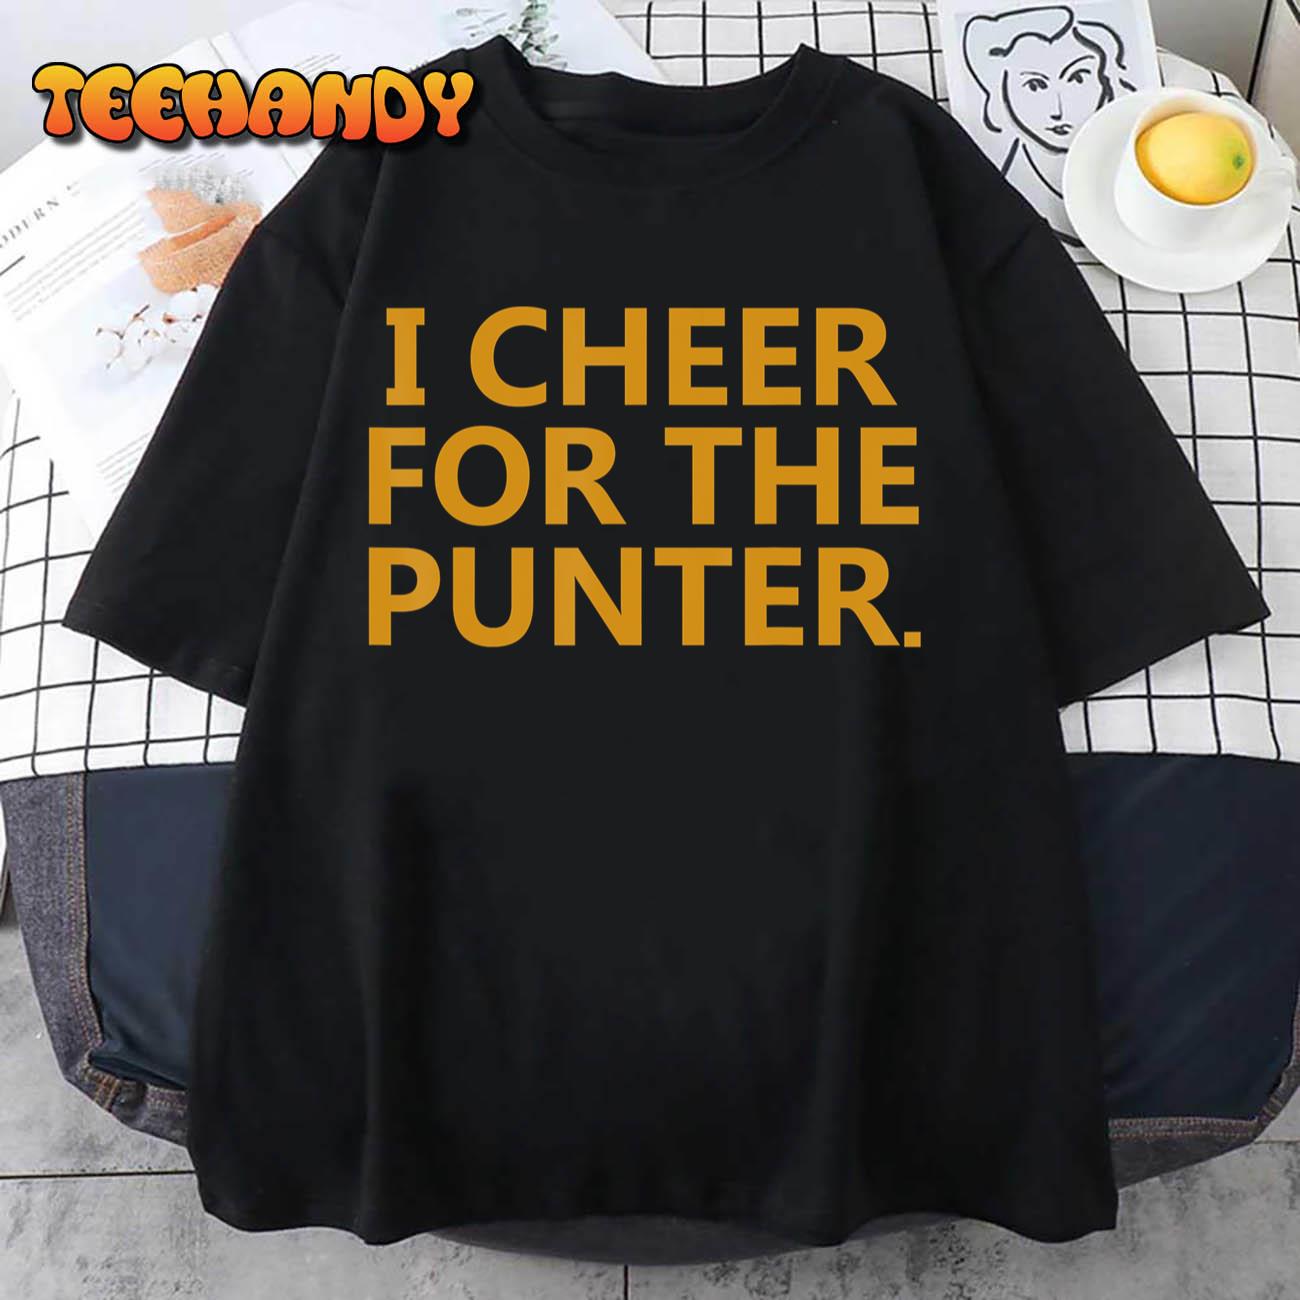 I cheer For The Punter T-Shirt